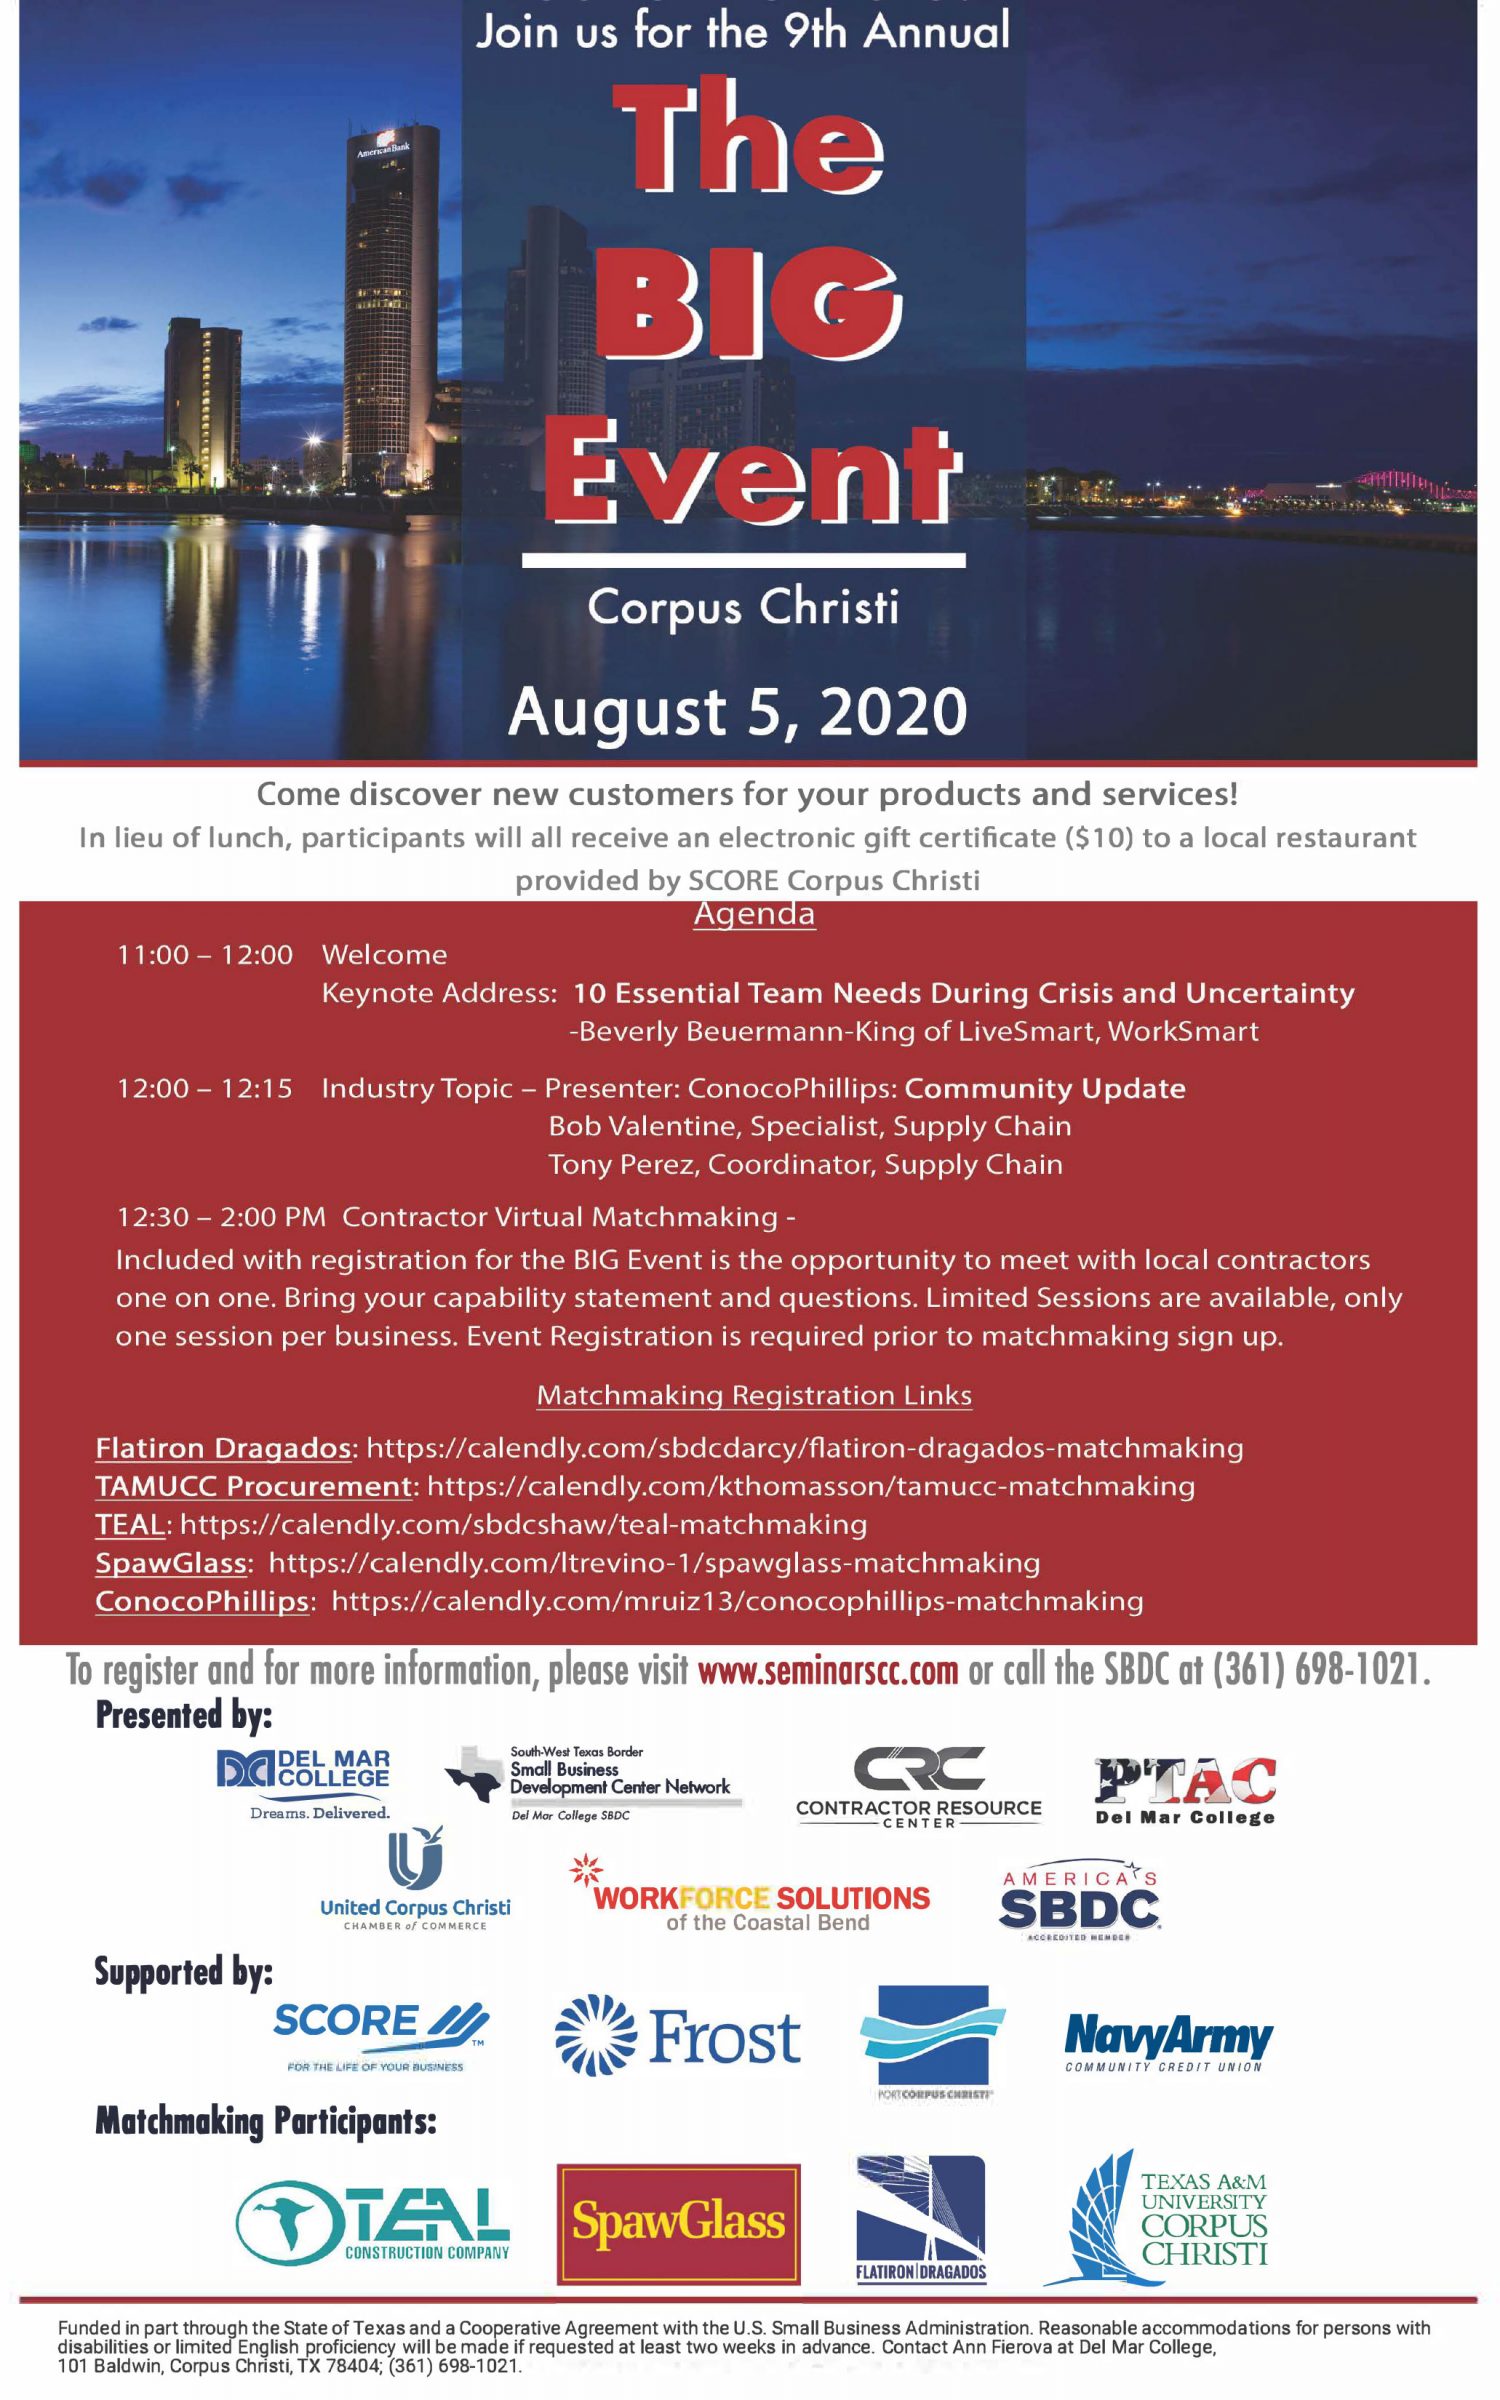 Register for the Big Event on August 5, 2020